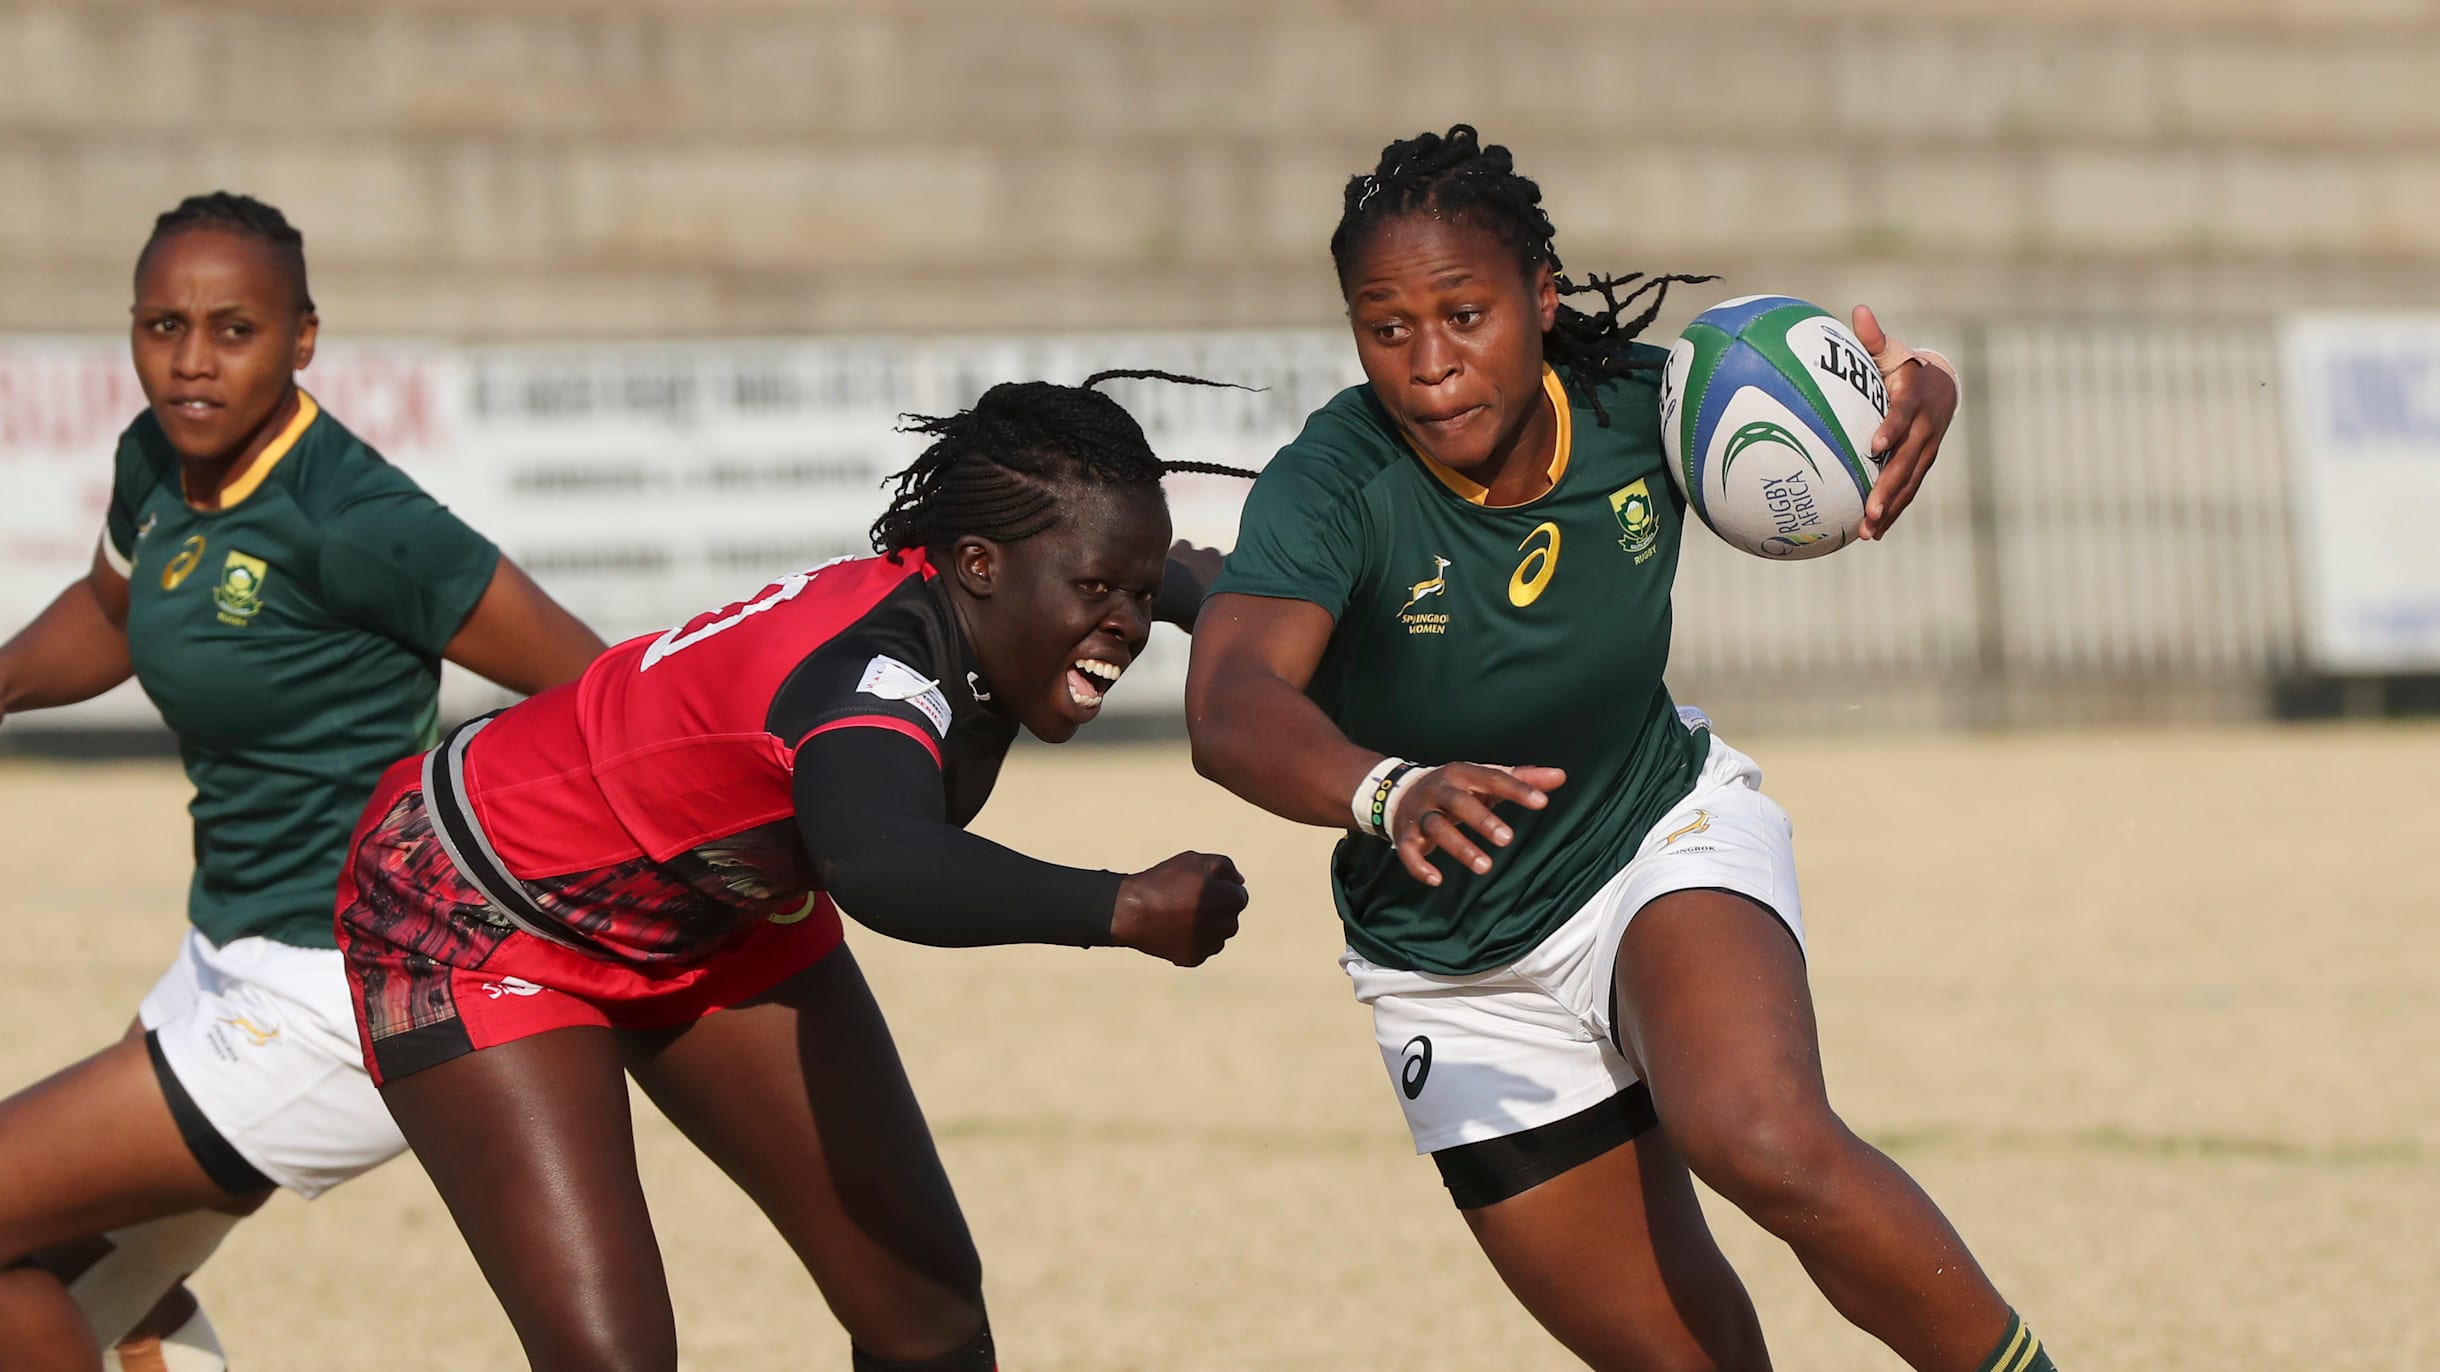 South Africa womens rugby pioneer Zintle Mpupha on World Cup hopes and overcoming self-doubt “There were times I wanted to quit”